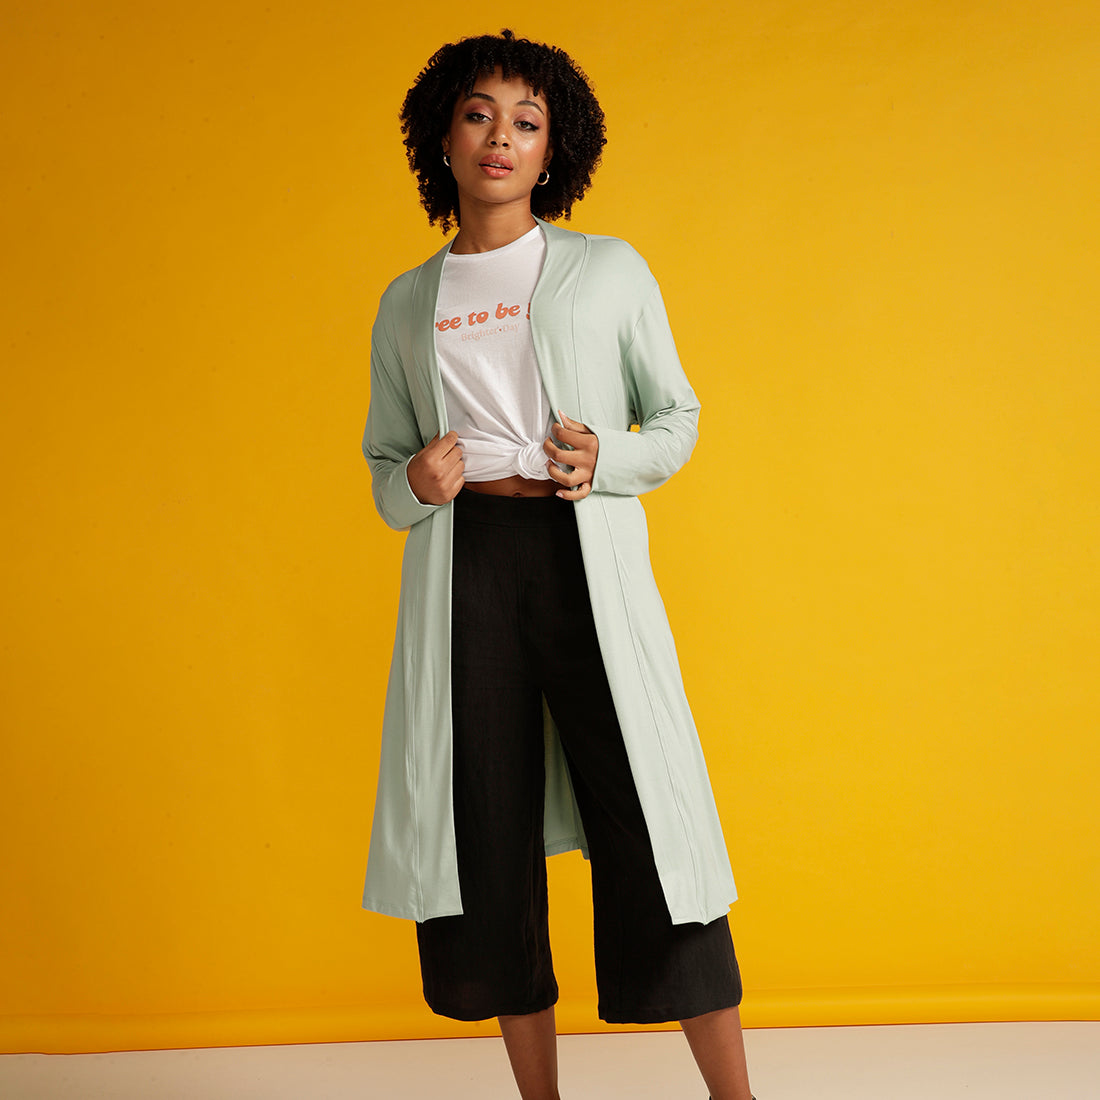 Curly haired woman in mint cardigan